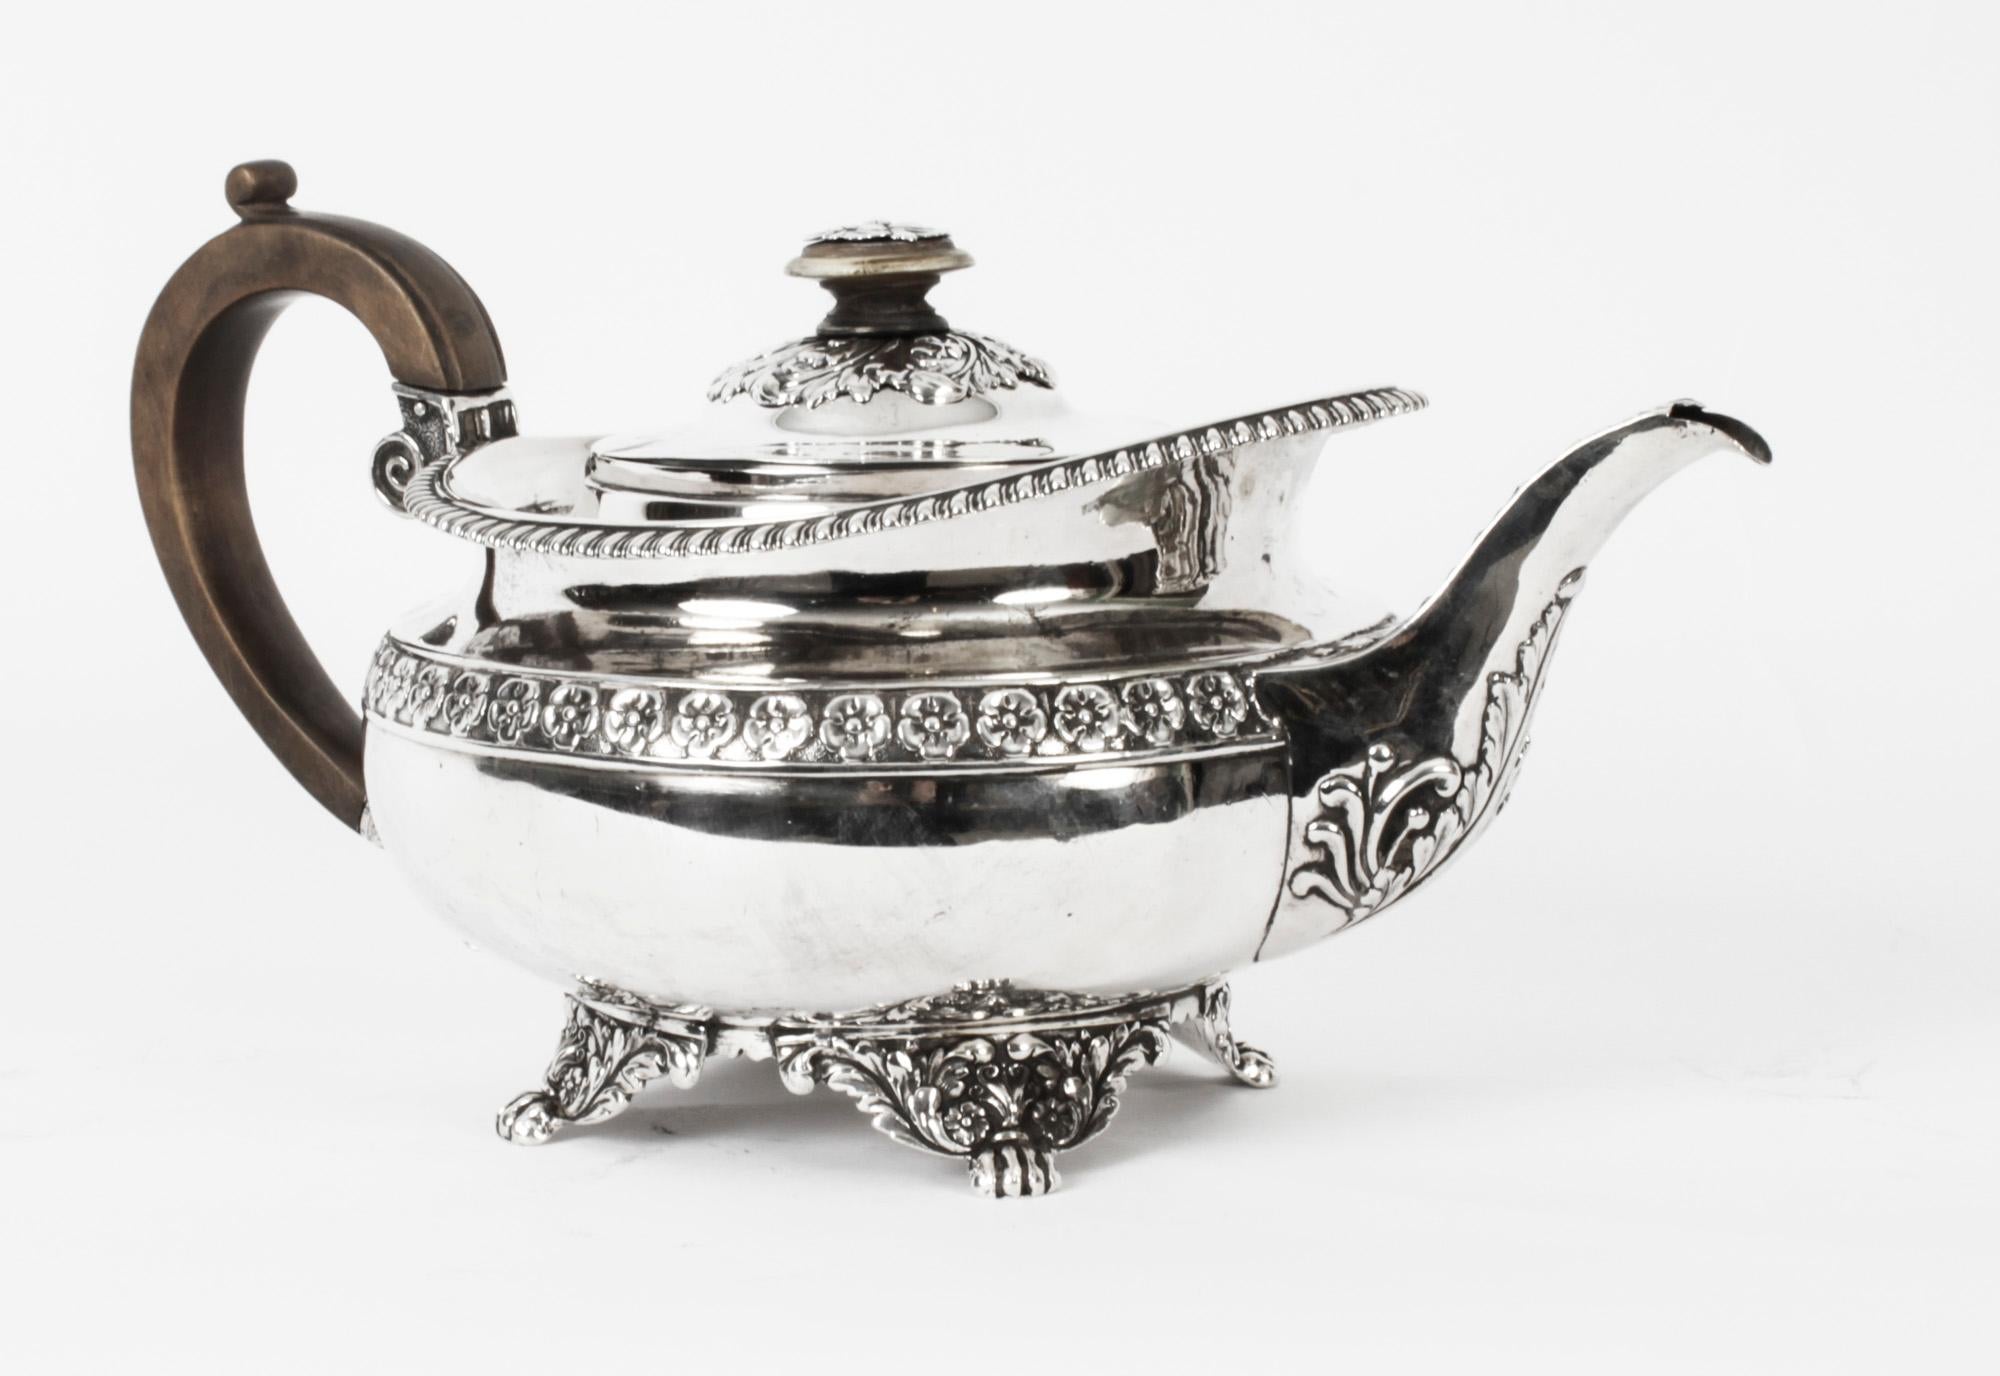 This is a wonderful antique George III sterling silver teapot with the makers mark of one of the most celebrated silversmiths, Craddock & Reid and dated 1820.
 
It features a squat, globular form with gadroon borders, floral accents, a C-form